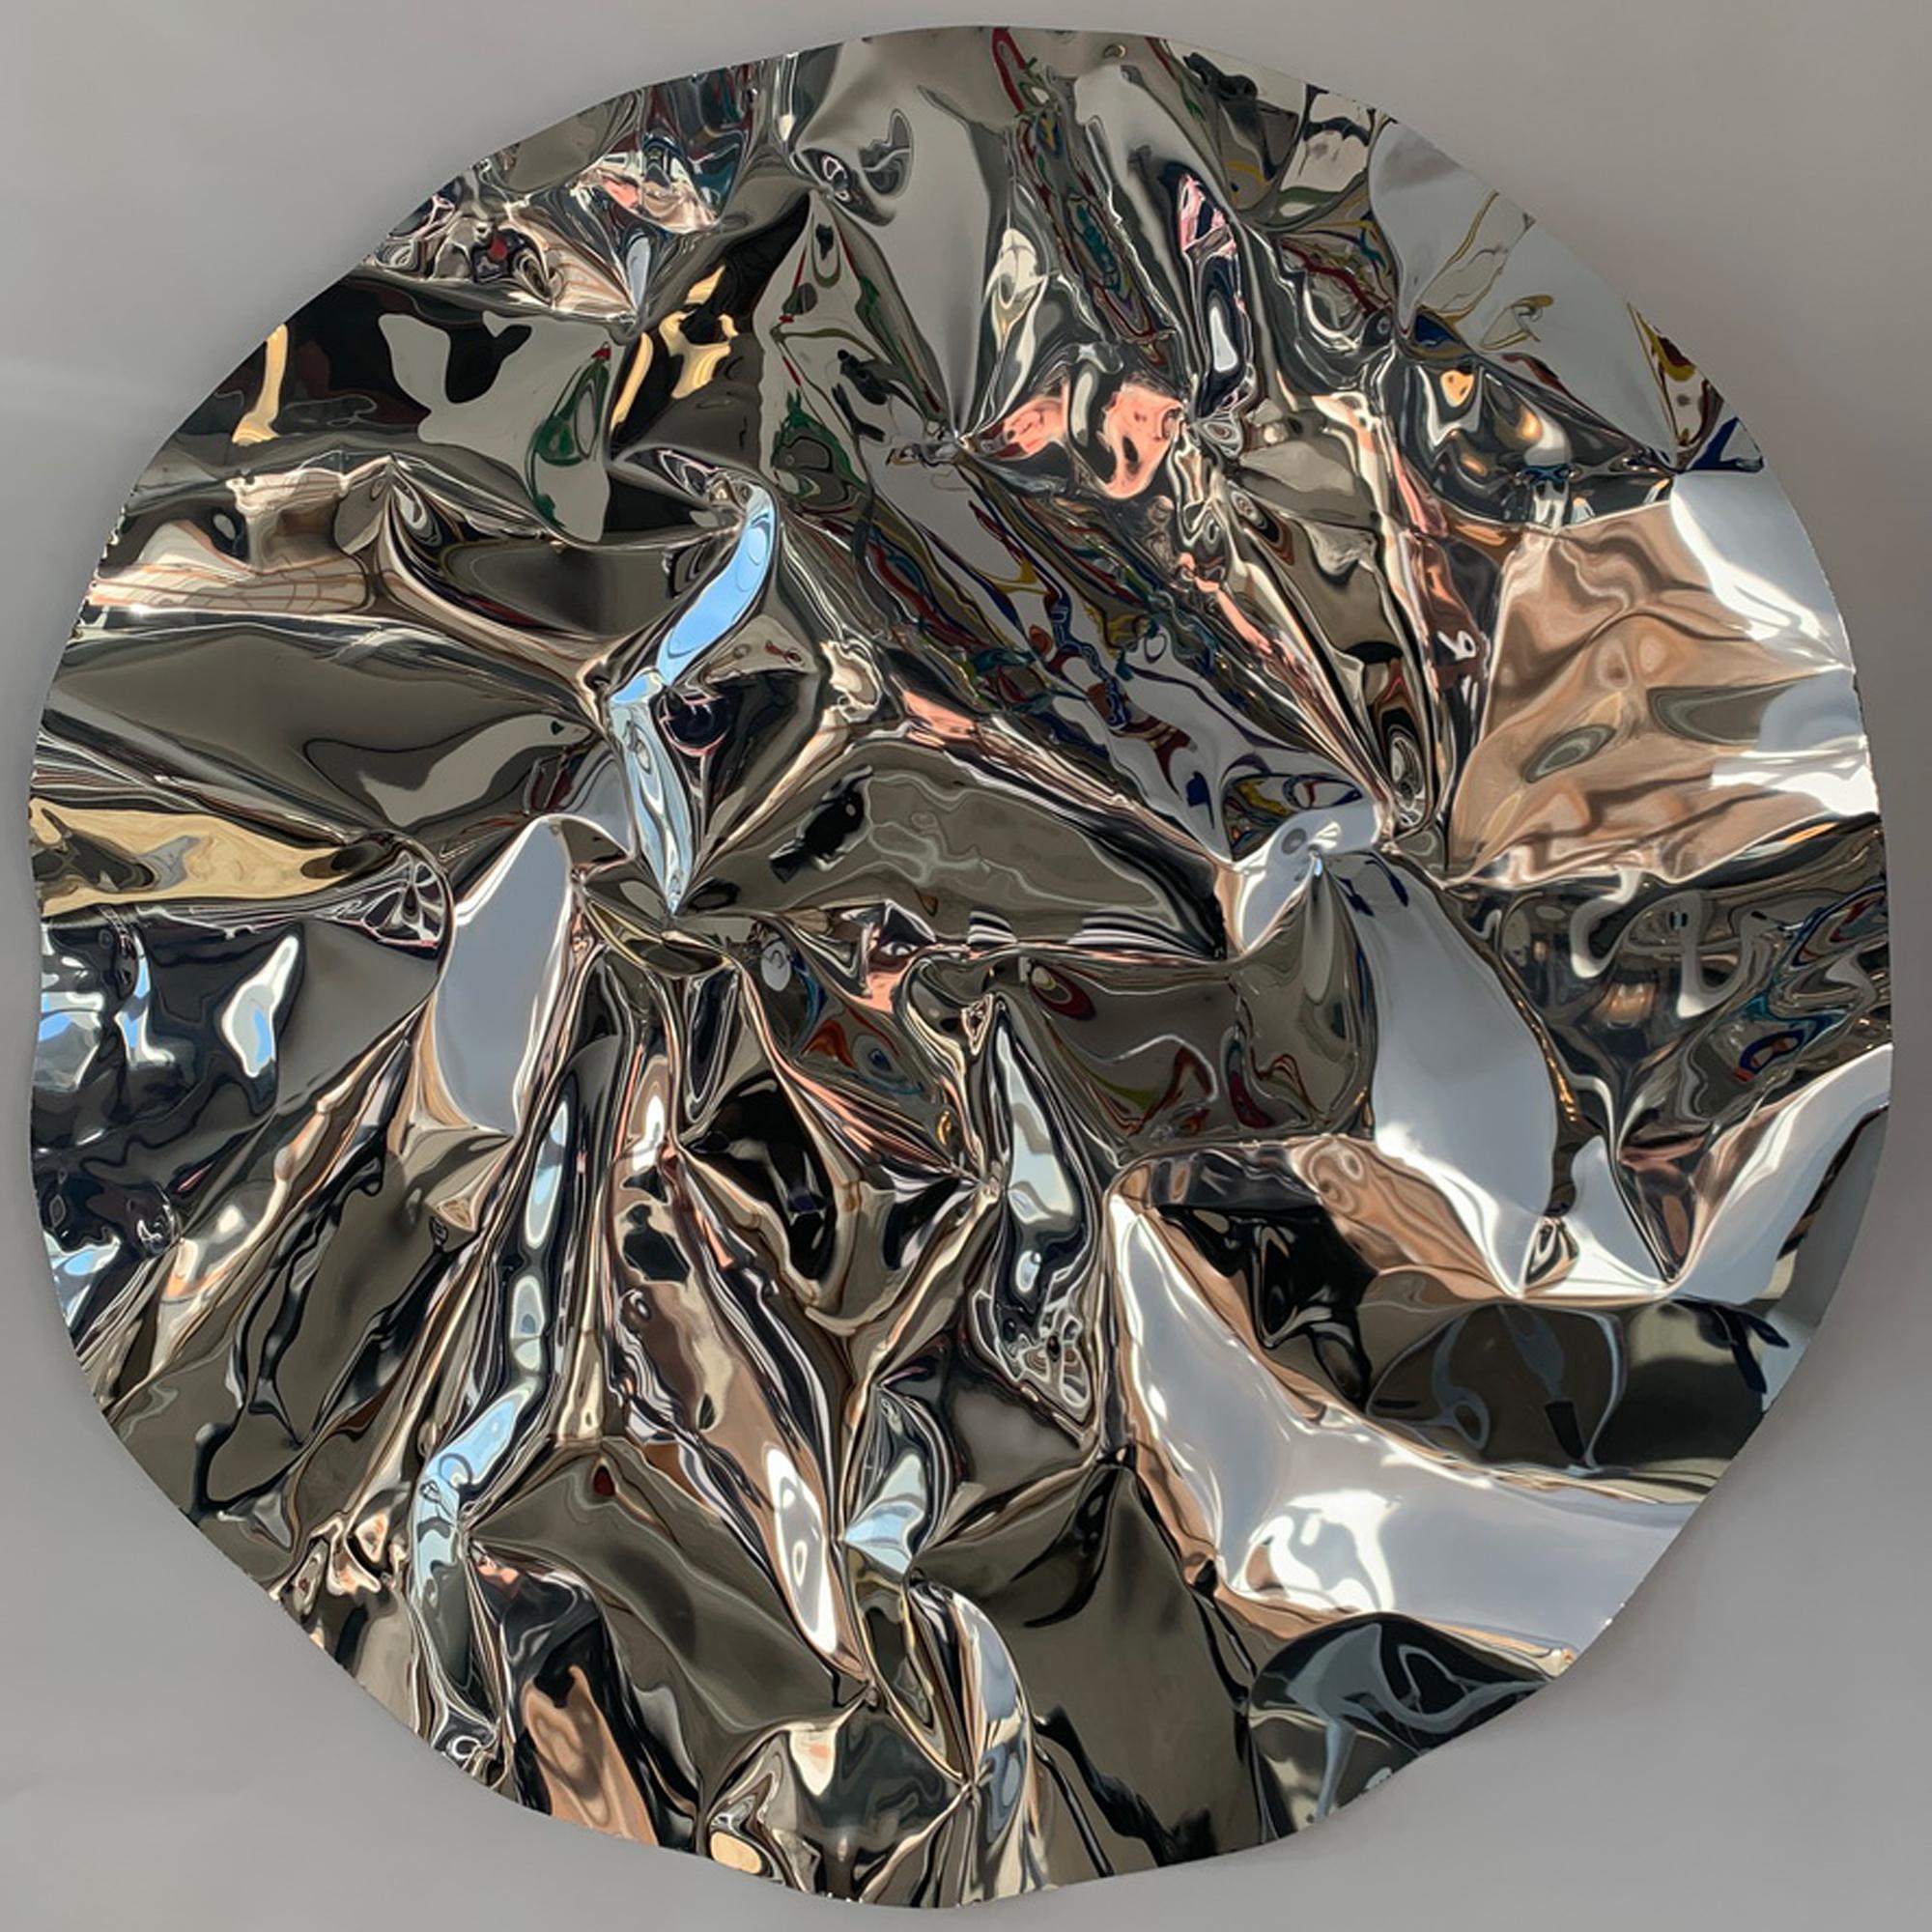 The Luster Medallion is a hand-formed sheet of aluminum, carefully folded and bent to create a ripple effect on the surface. This piece makes a beautiful addition to walls that need texture and visual interest. Mirrored surfaces reflect the interior